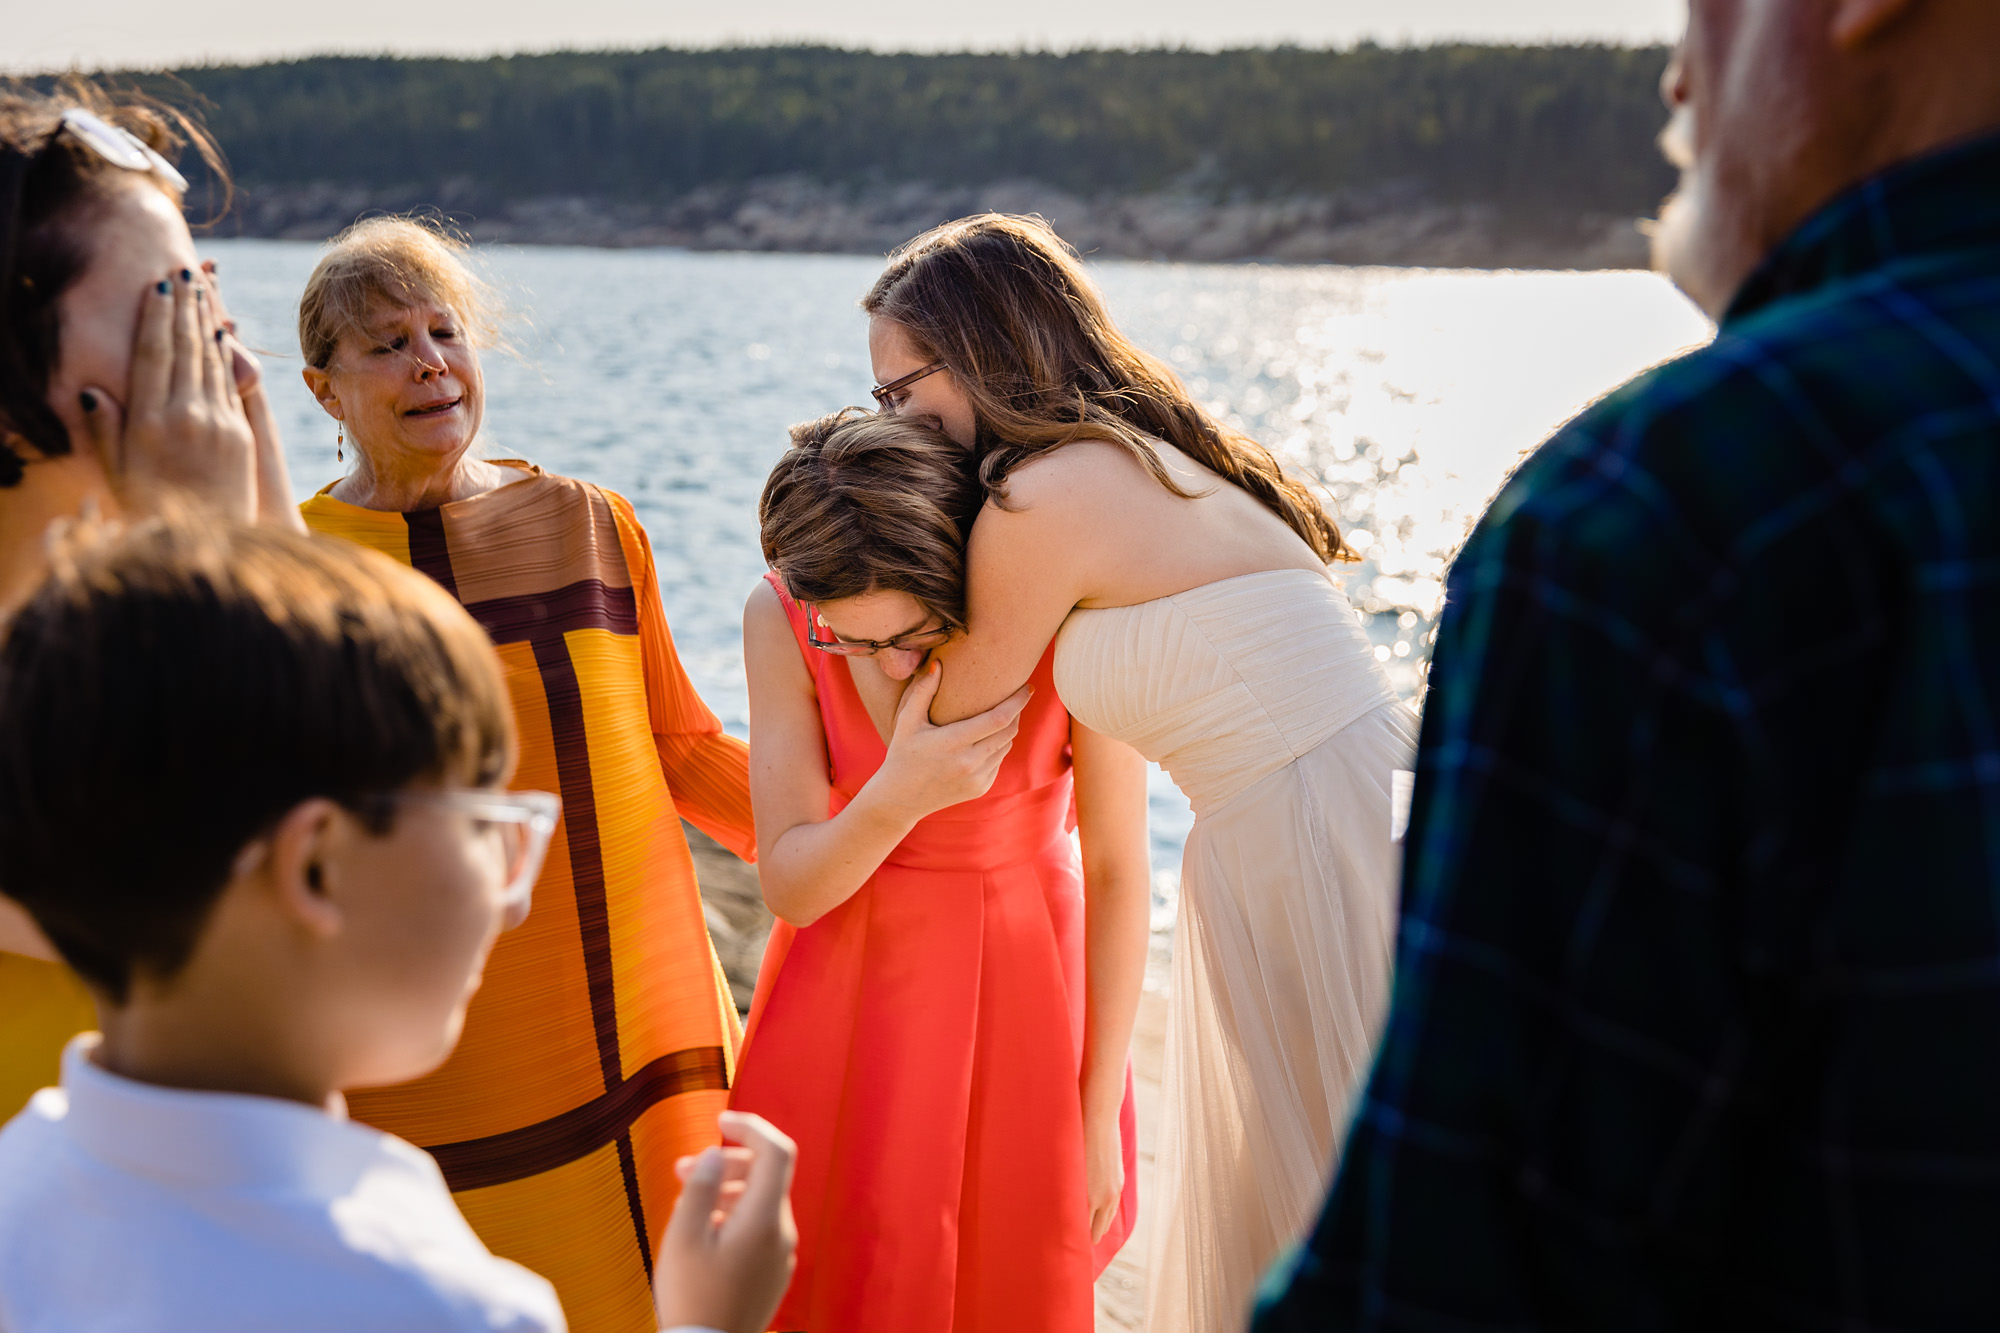 The bride embraces her daughter while her new step-daughter cries